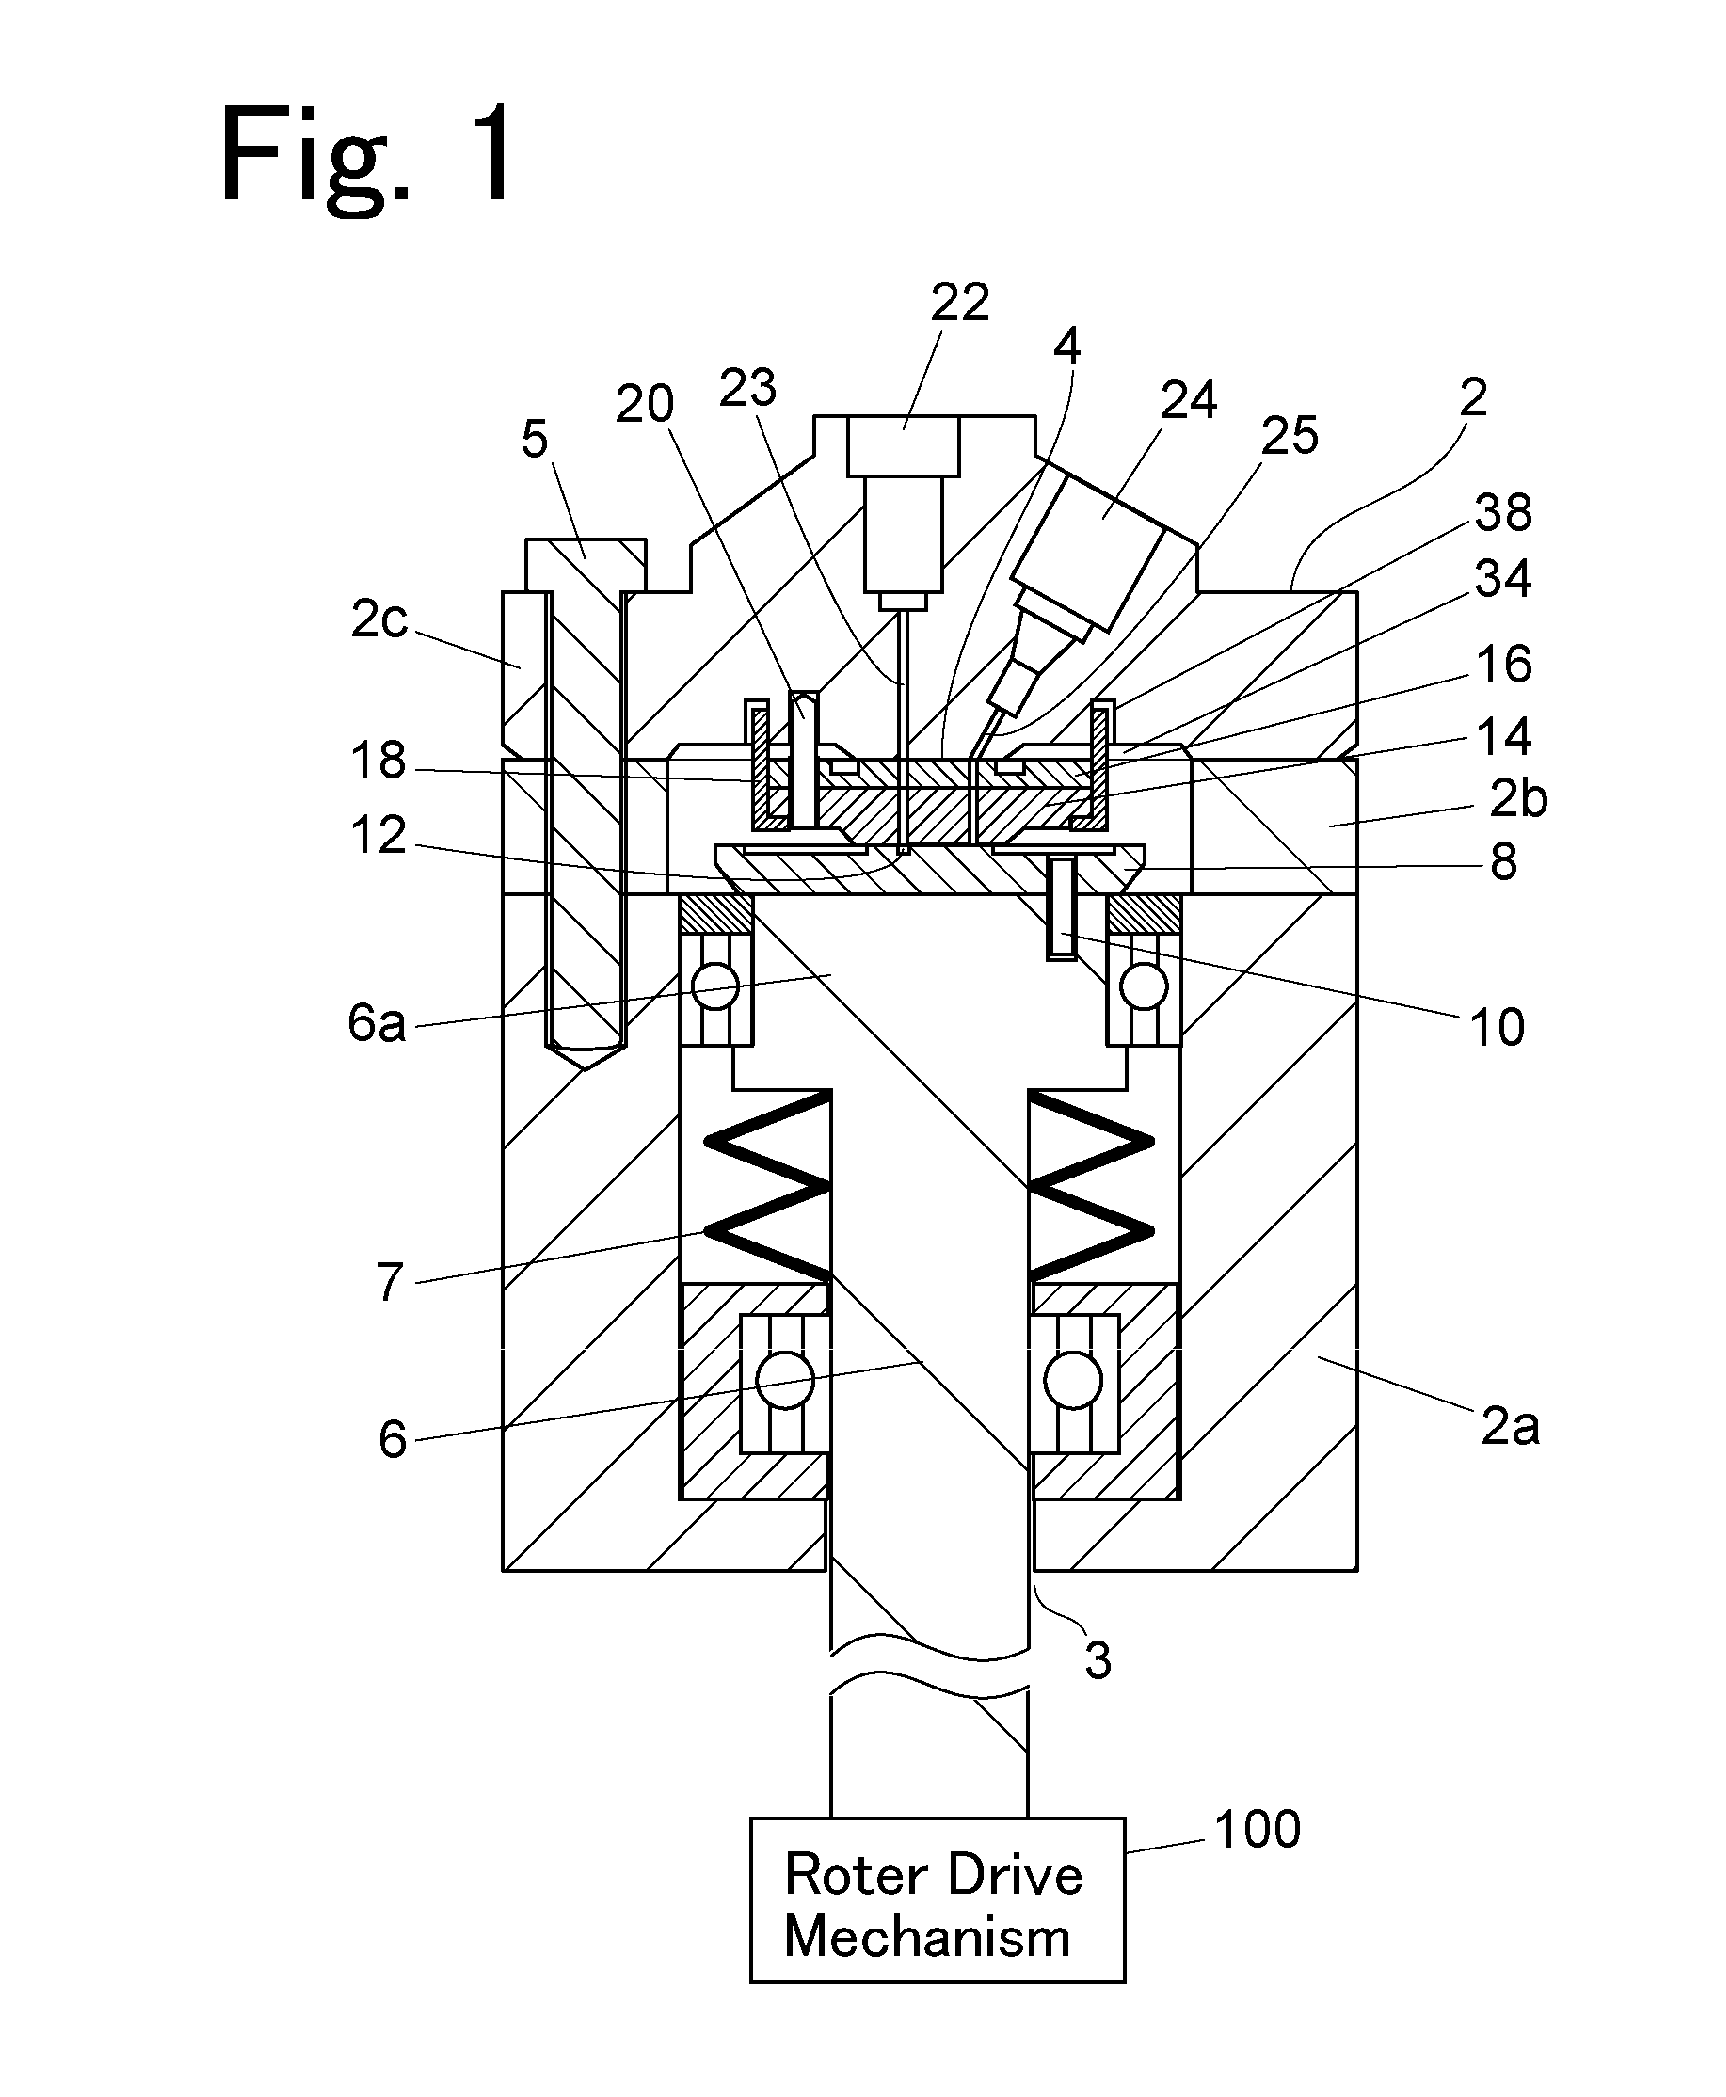 Flow channel switching valve